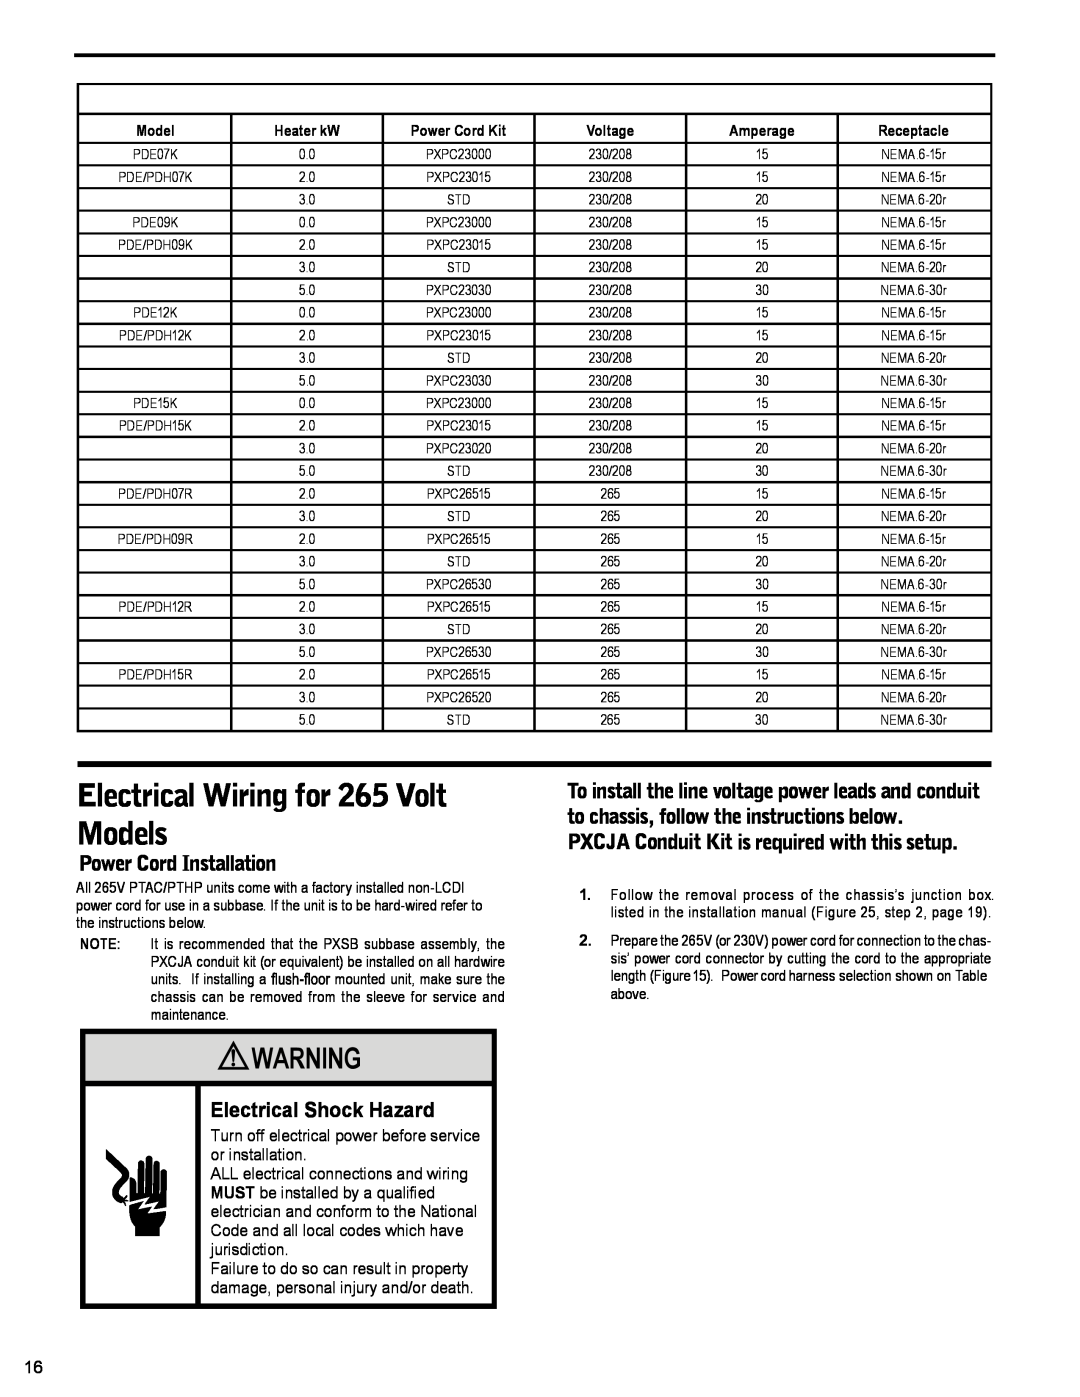 Friedrich PTAC - R410A service manual Electrical Wiring for 265 Volt Models, Power Cord Installation 